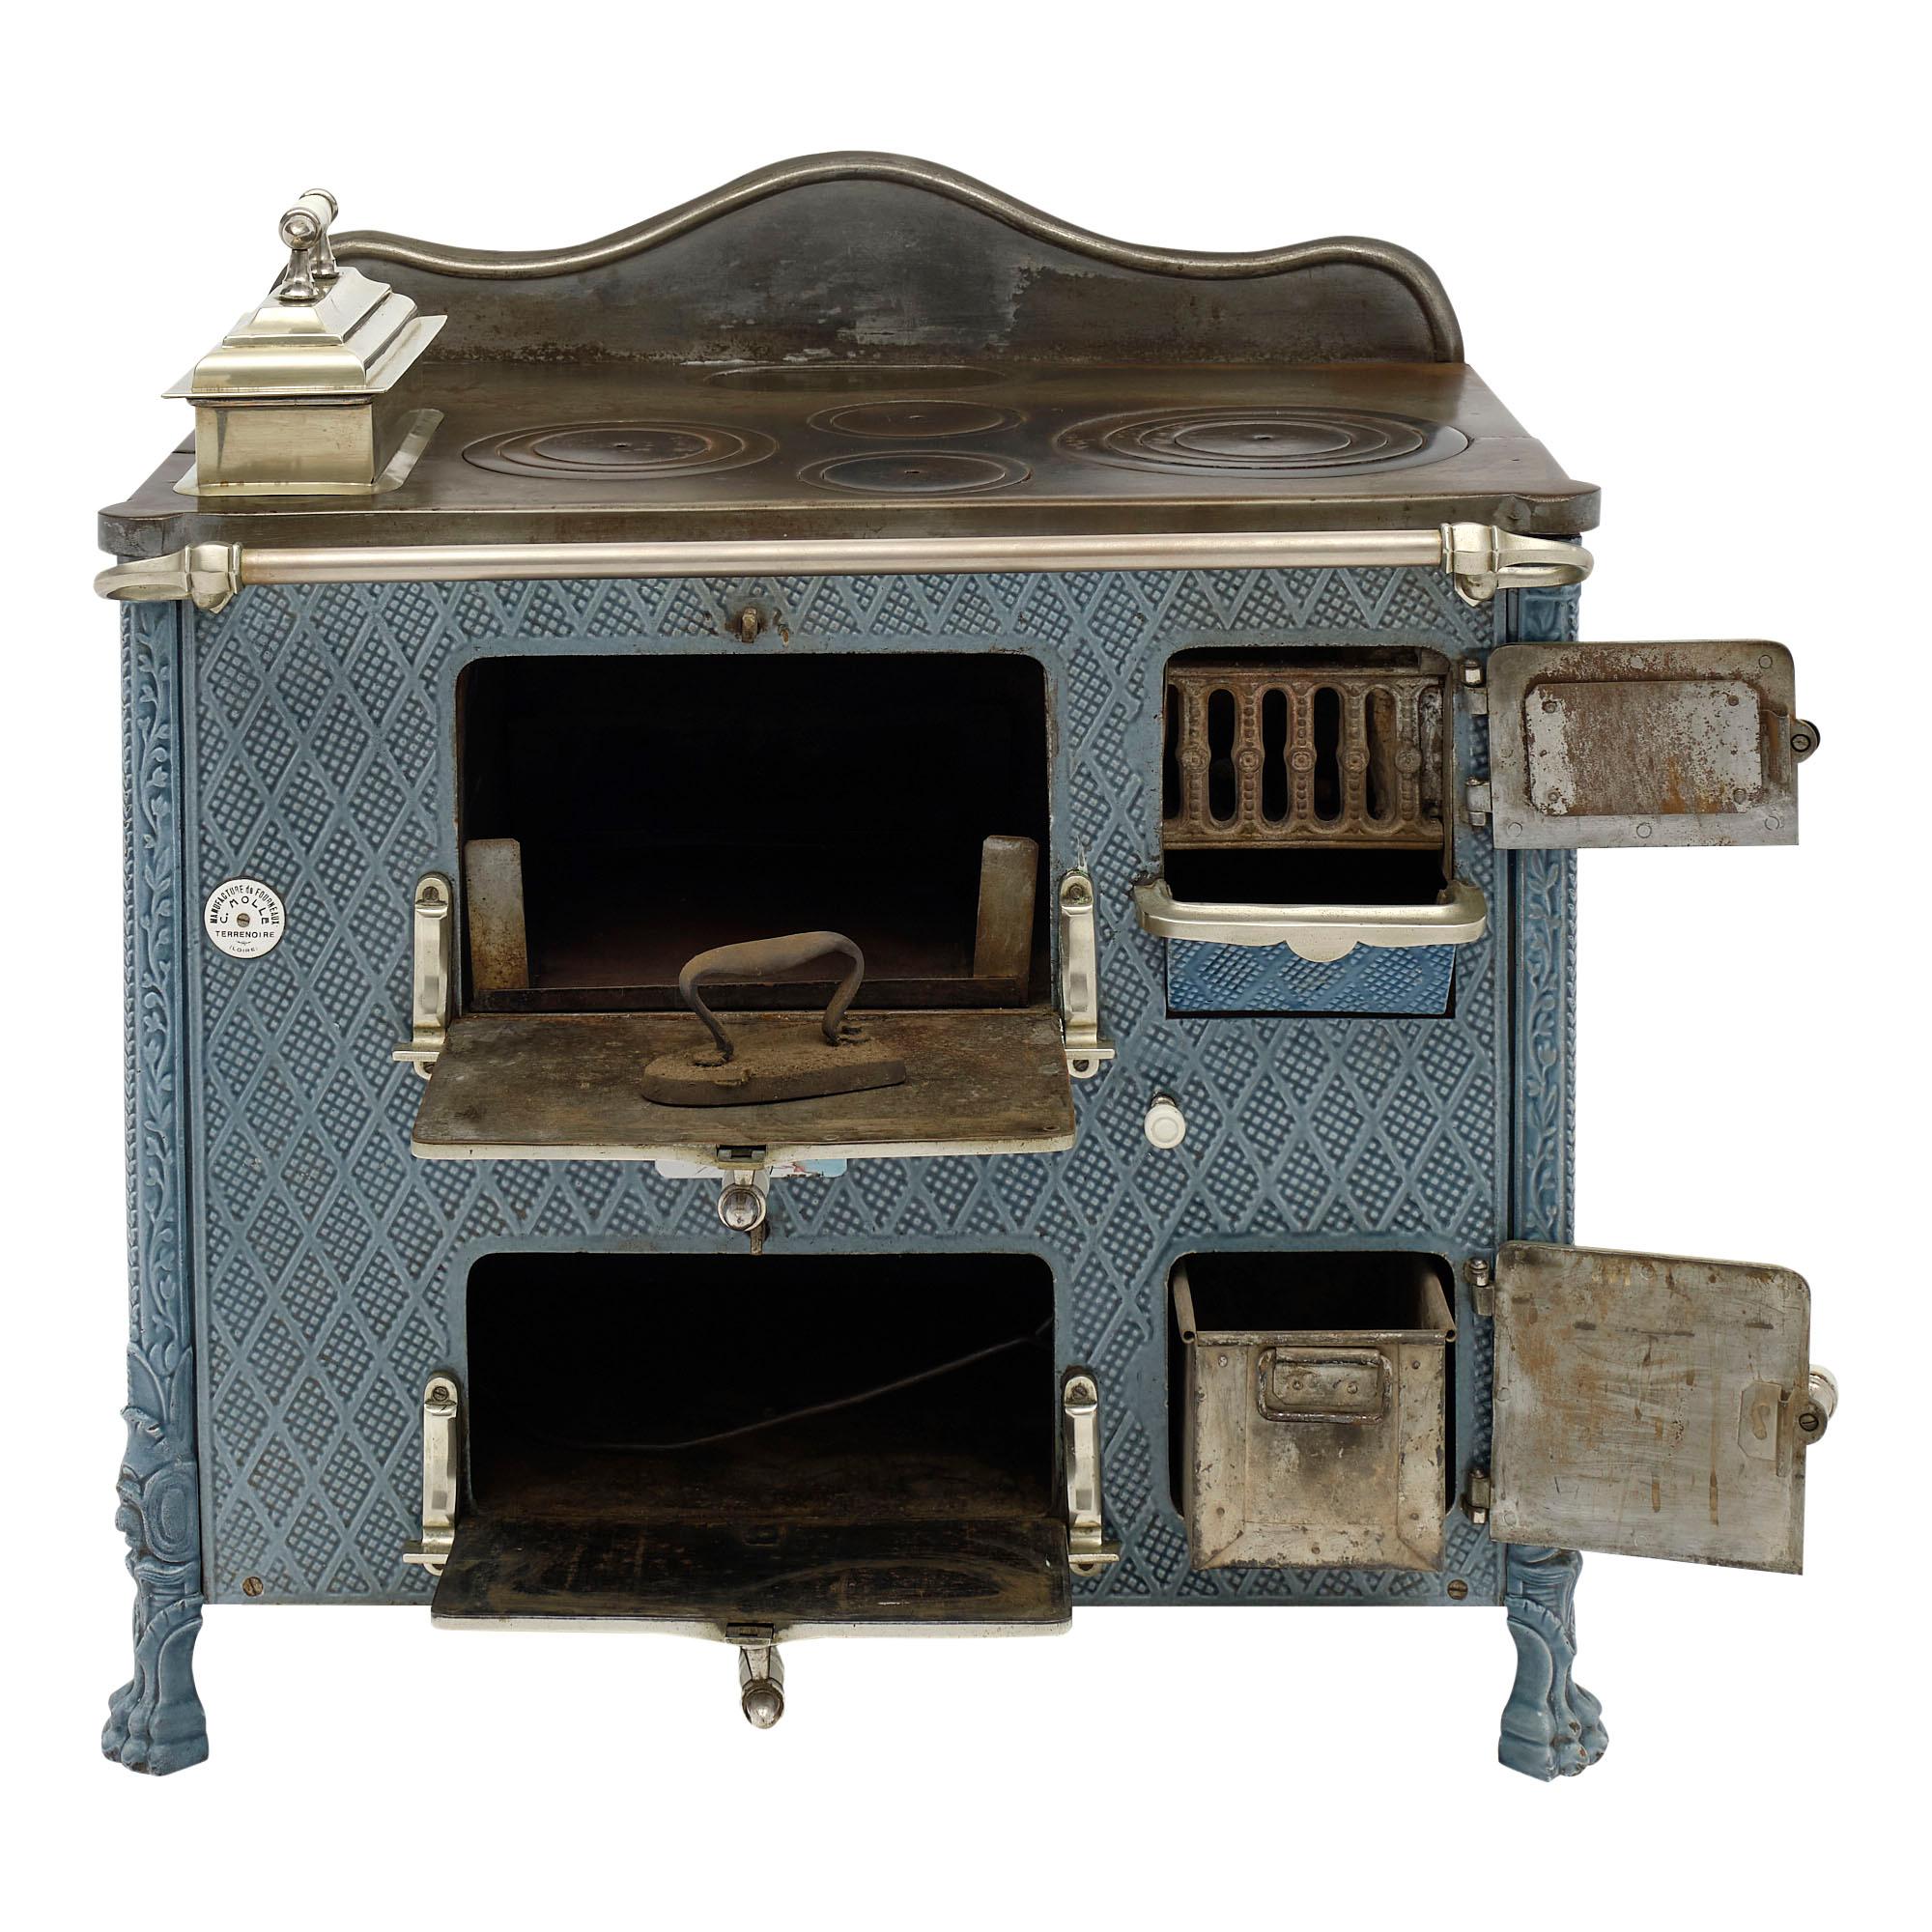 Early 20th Century Art Nouveau Antique French Stove